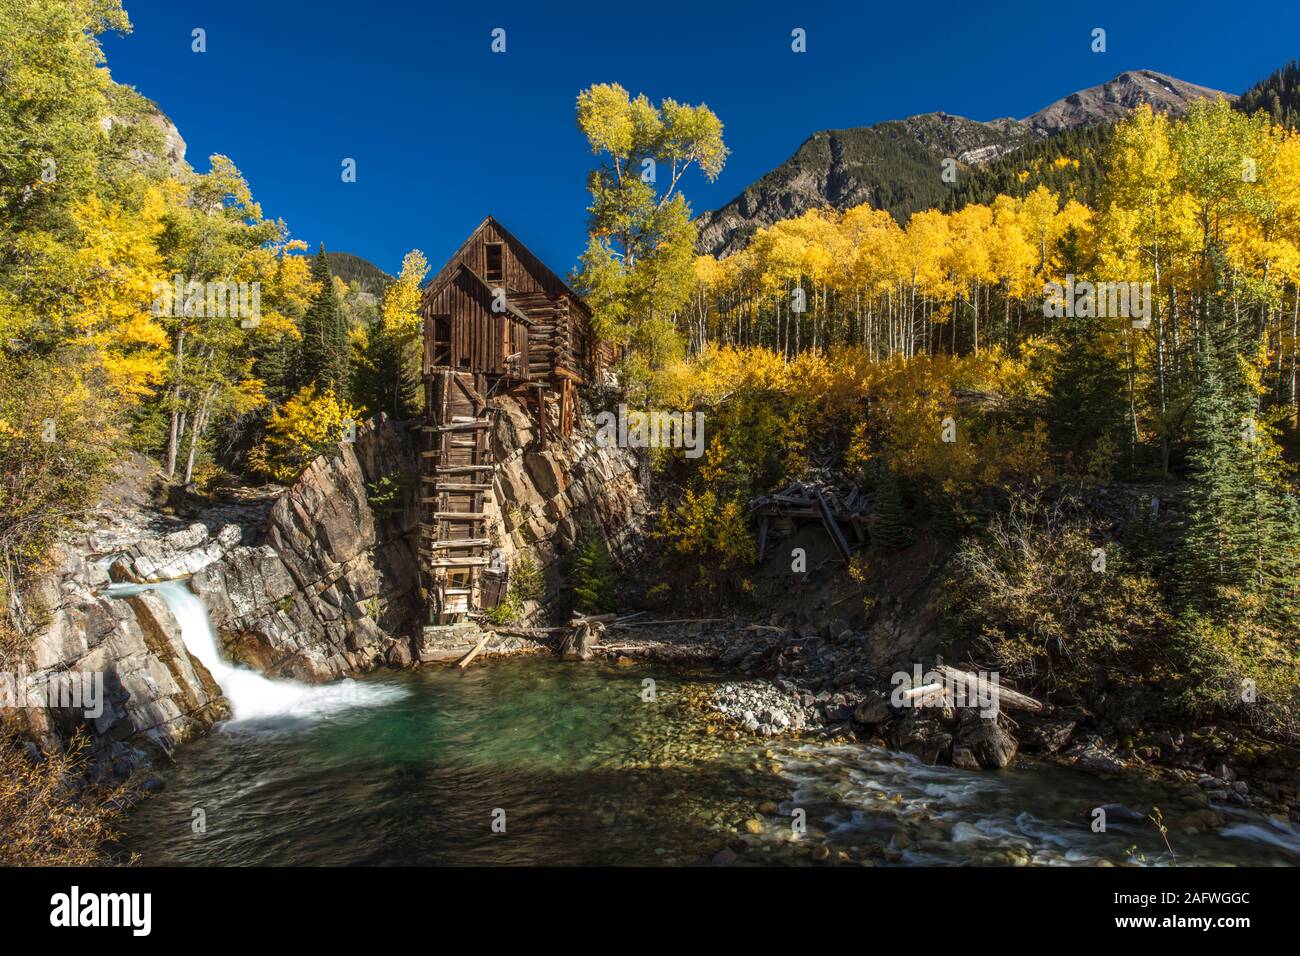 OCTOBER 2, 2019, CRYSTAL, COLORADO, USA - Old Mill is an 1892 wooden powerhouse located on an outcrop above the Crystal River Stock Photo